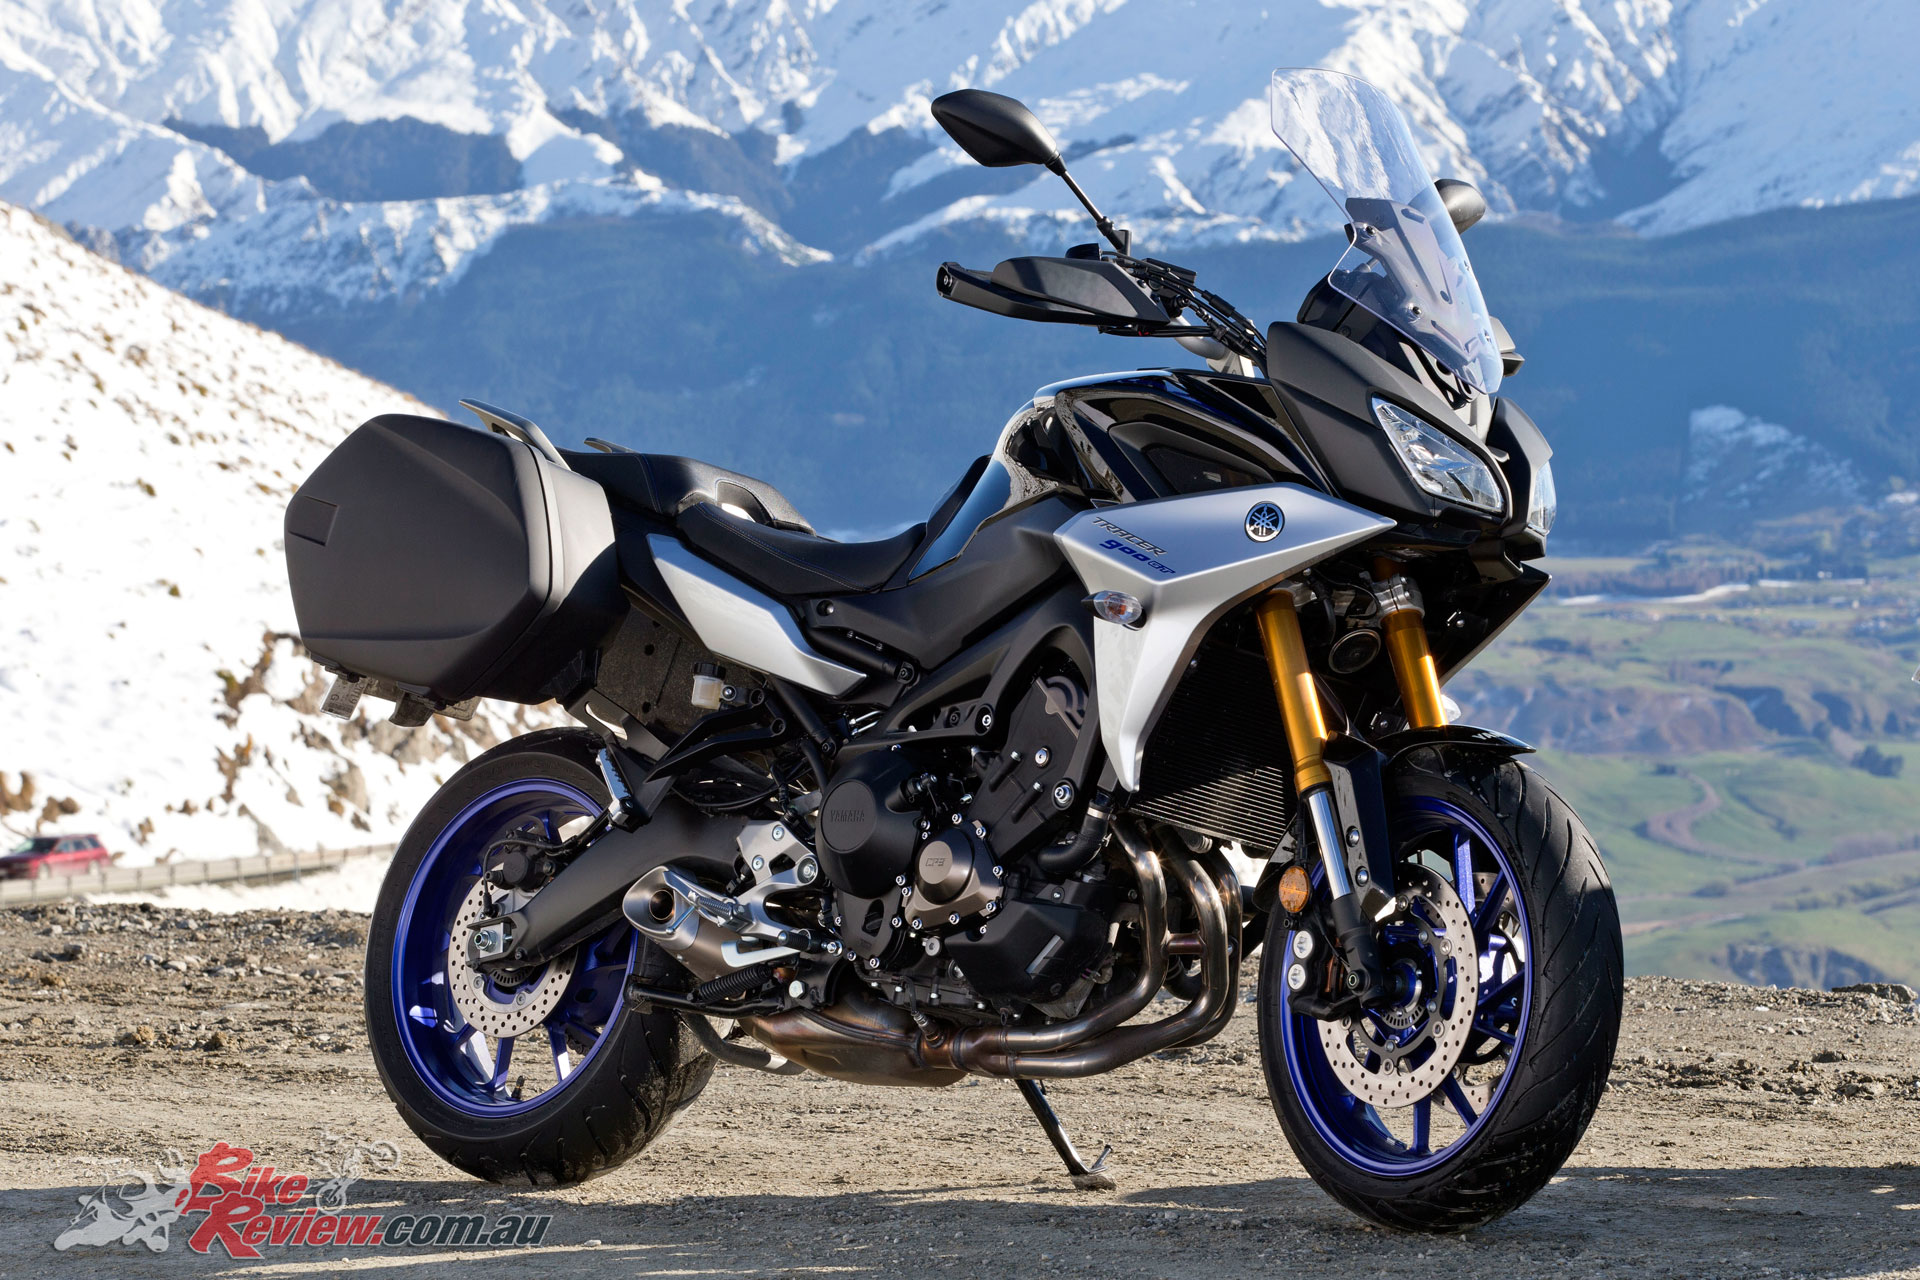 Video Review: 2019 Yamaha Tracer 900 GT - Bike Review